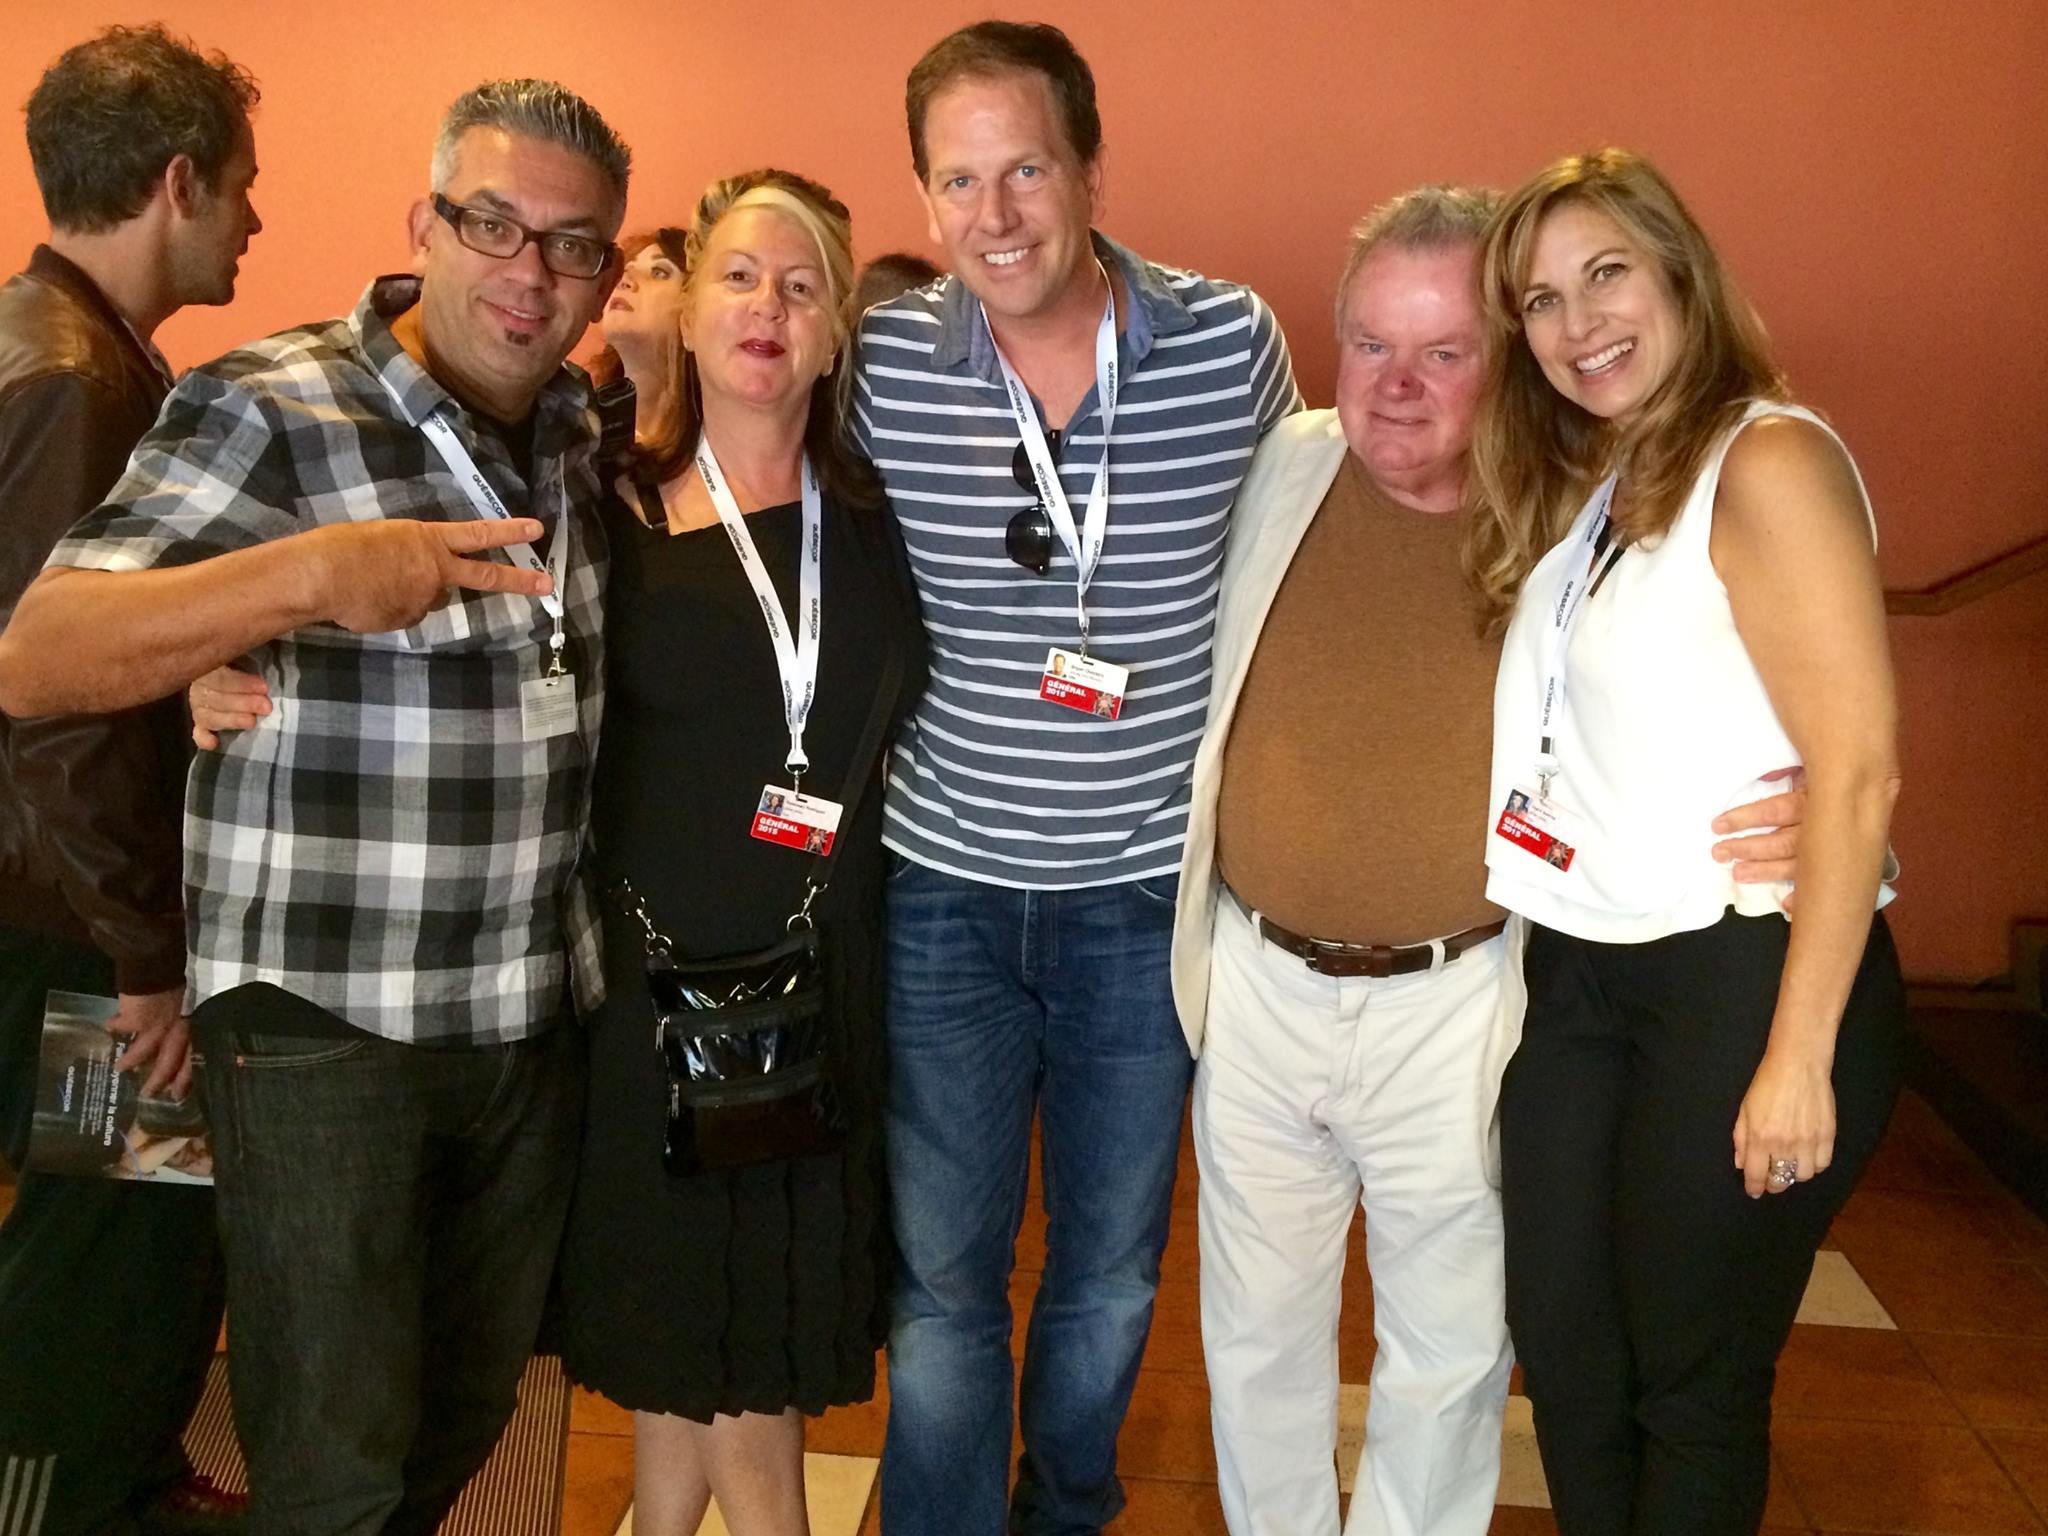 39th Annual Montreal Film Festival - Saving John Murphy & Silver Skies both screened. Bryan Chesters (Actor/Producer/Writer), Rosemary Rodriguez, Nestor Rodriguez, Jack McGee.